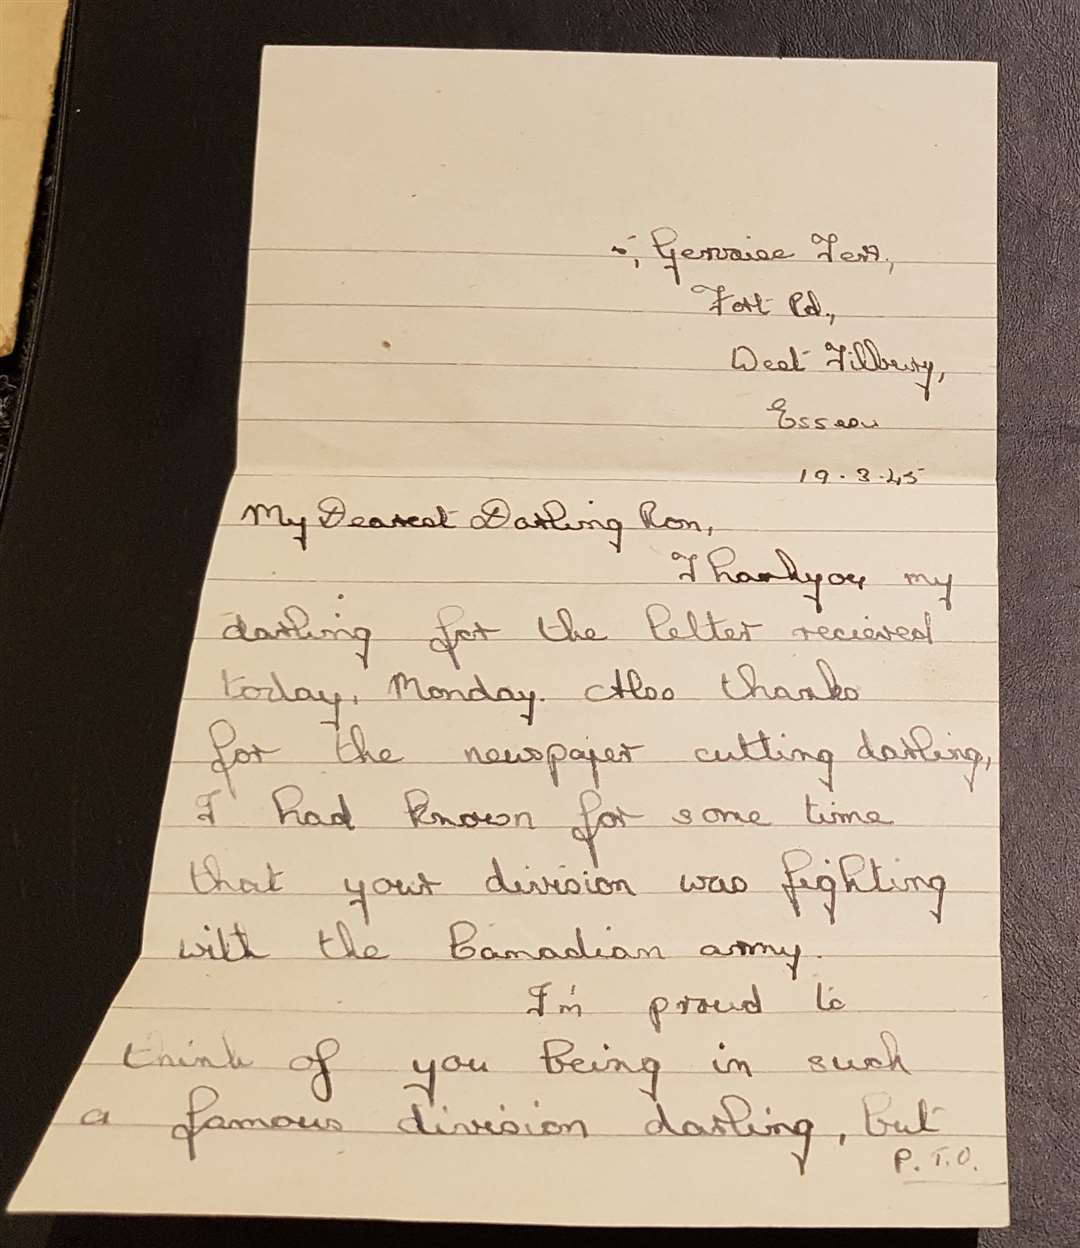 A page from one of the letters from Winnie to Ron back in 1945